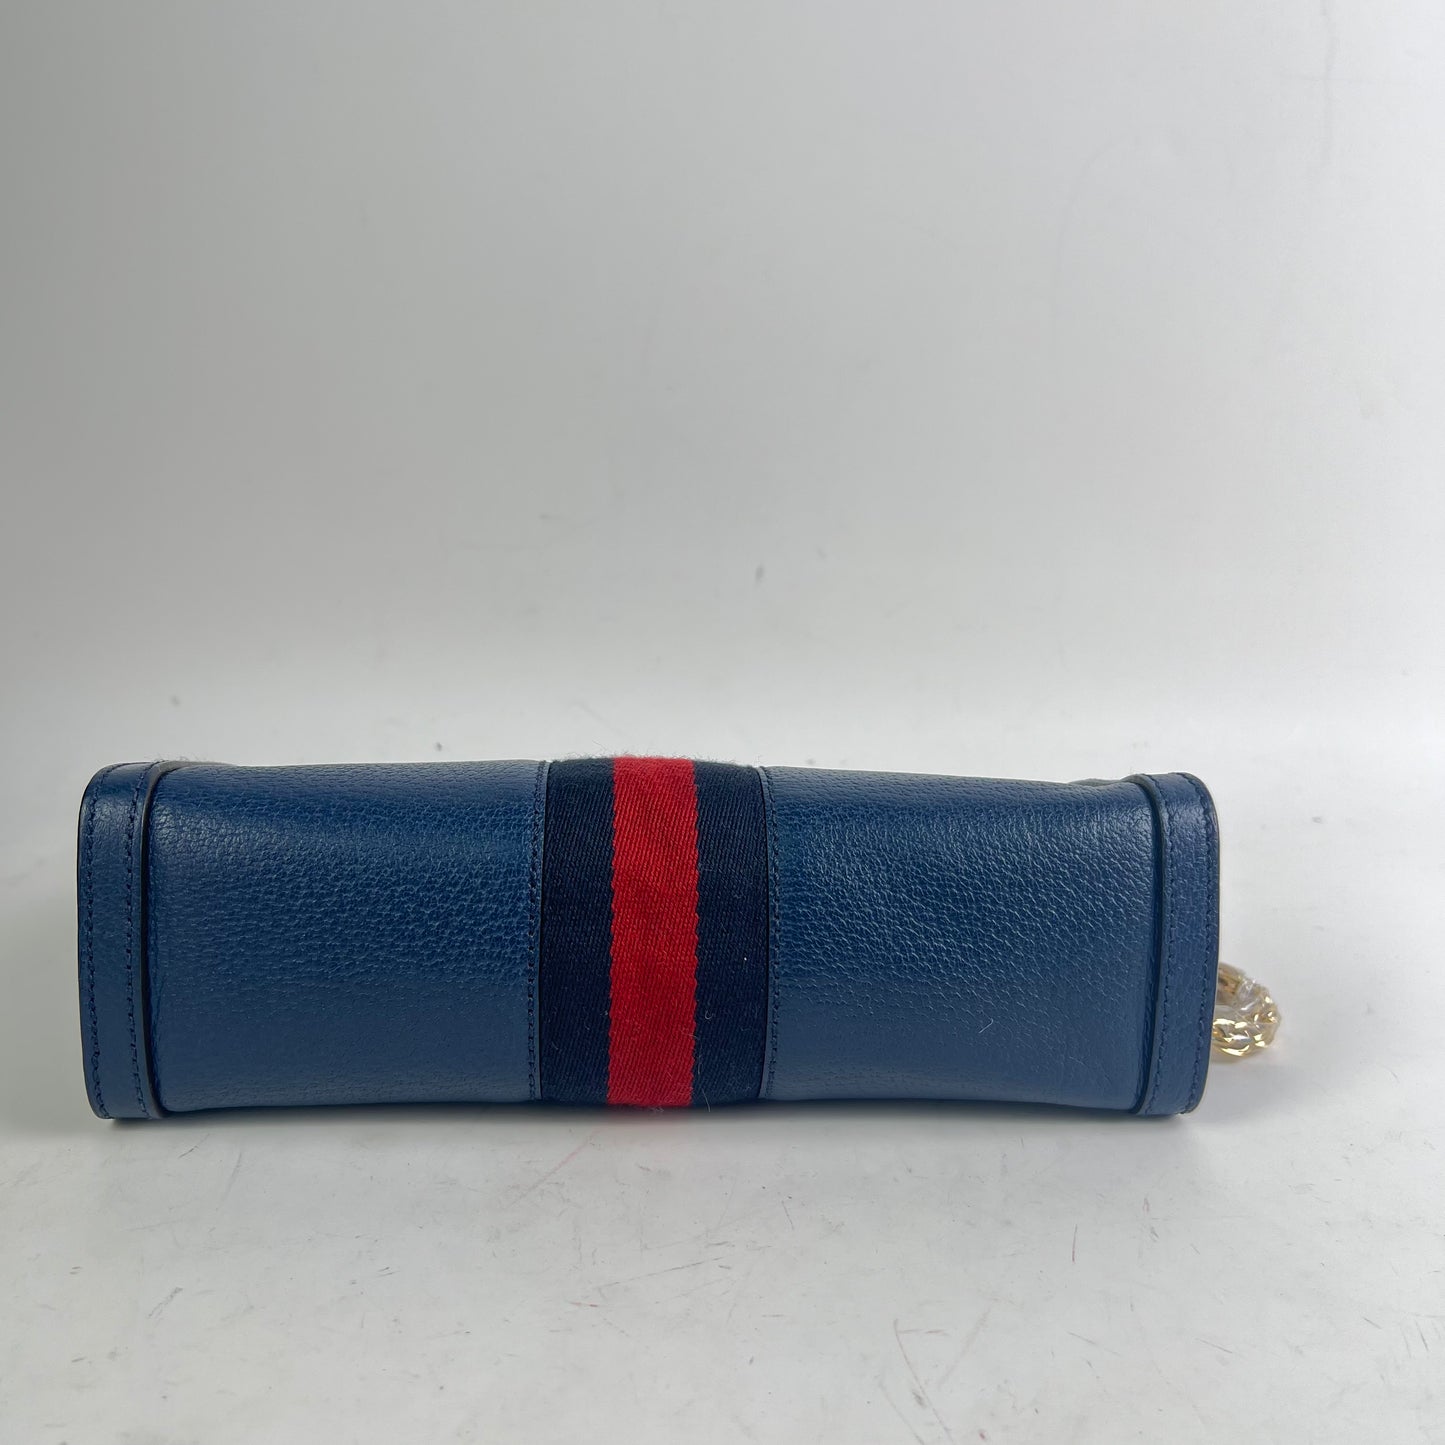 【Company Deal】Pre-owned Gucci Blue Ophidia Calfskin Crossbody Bag-HZ